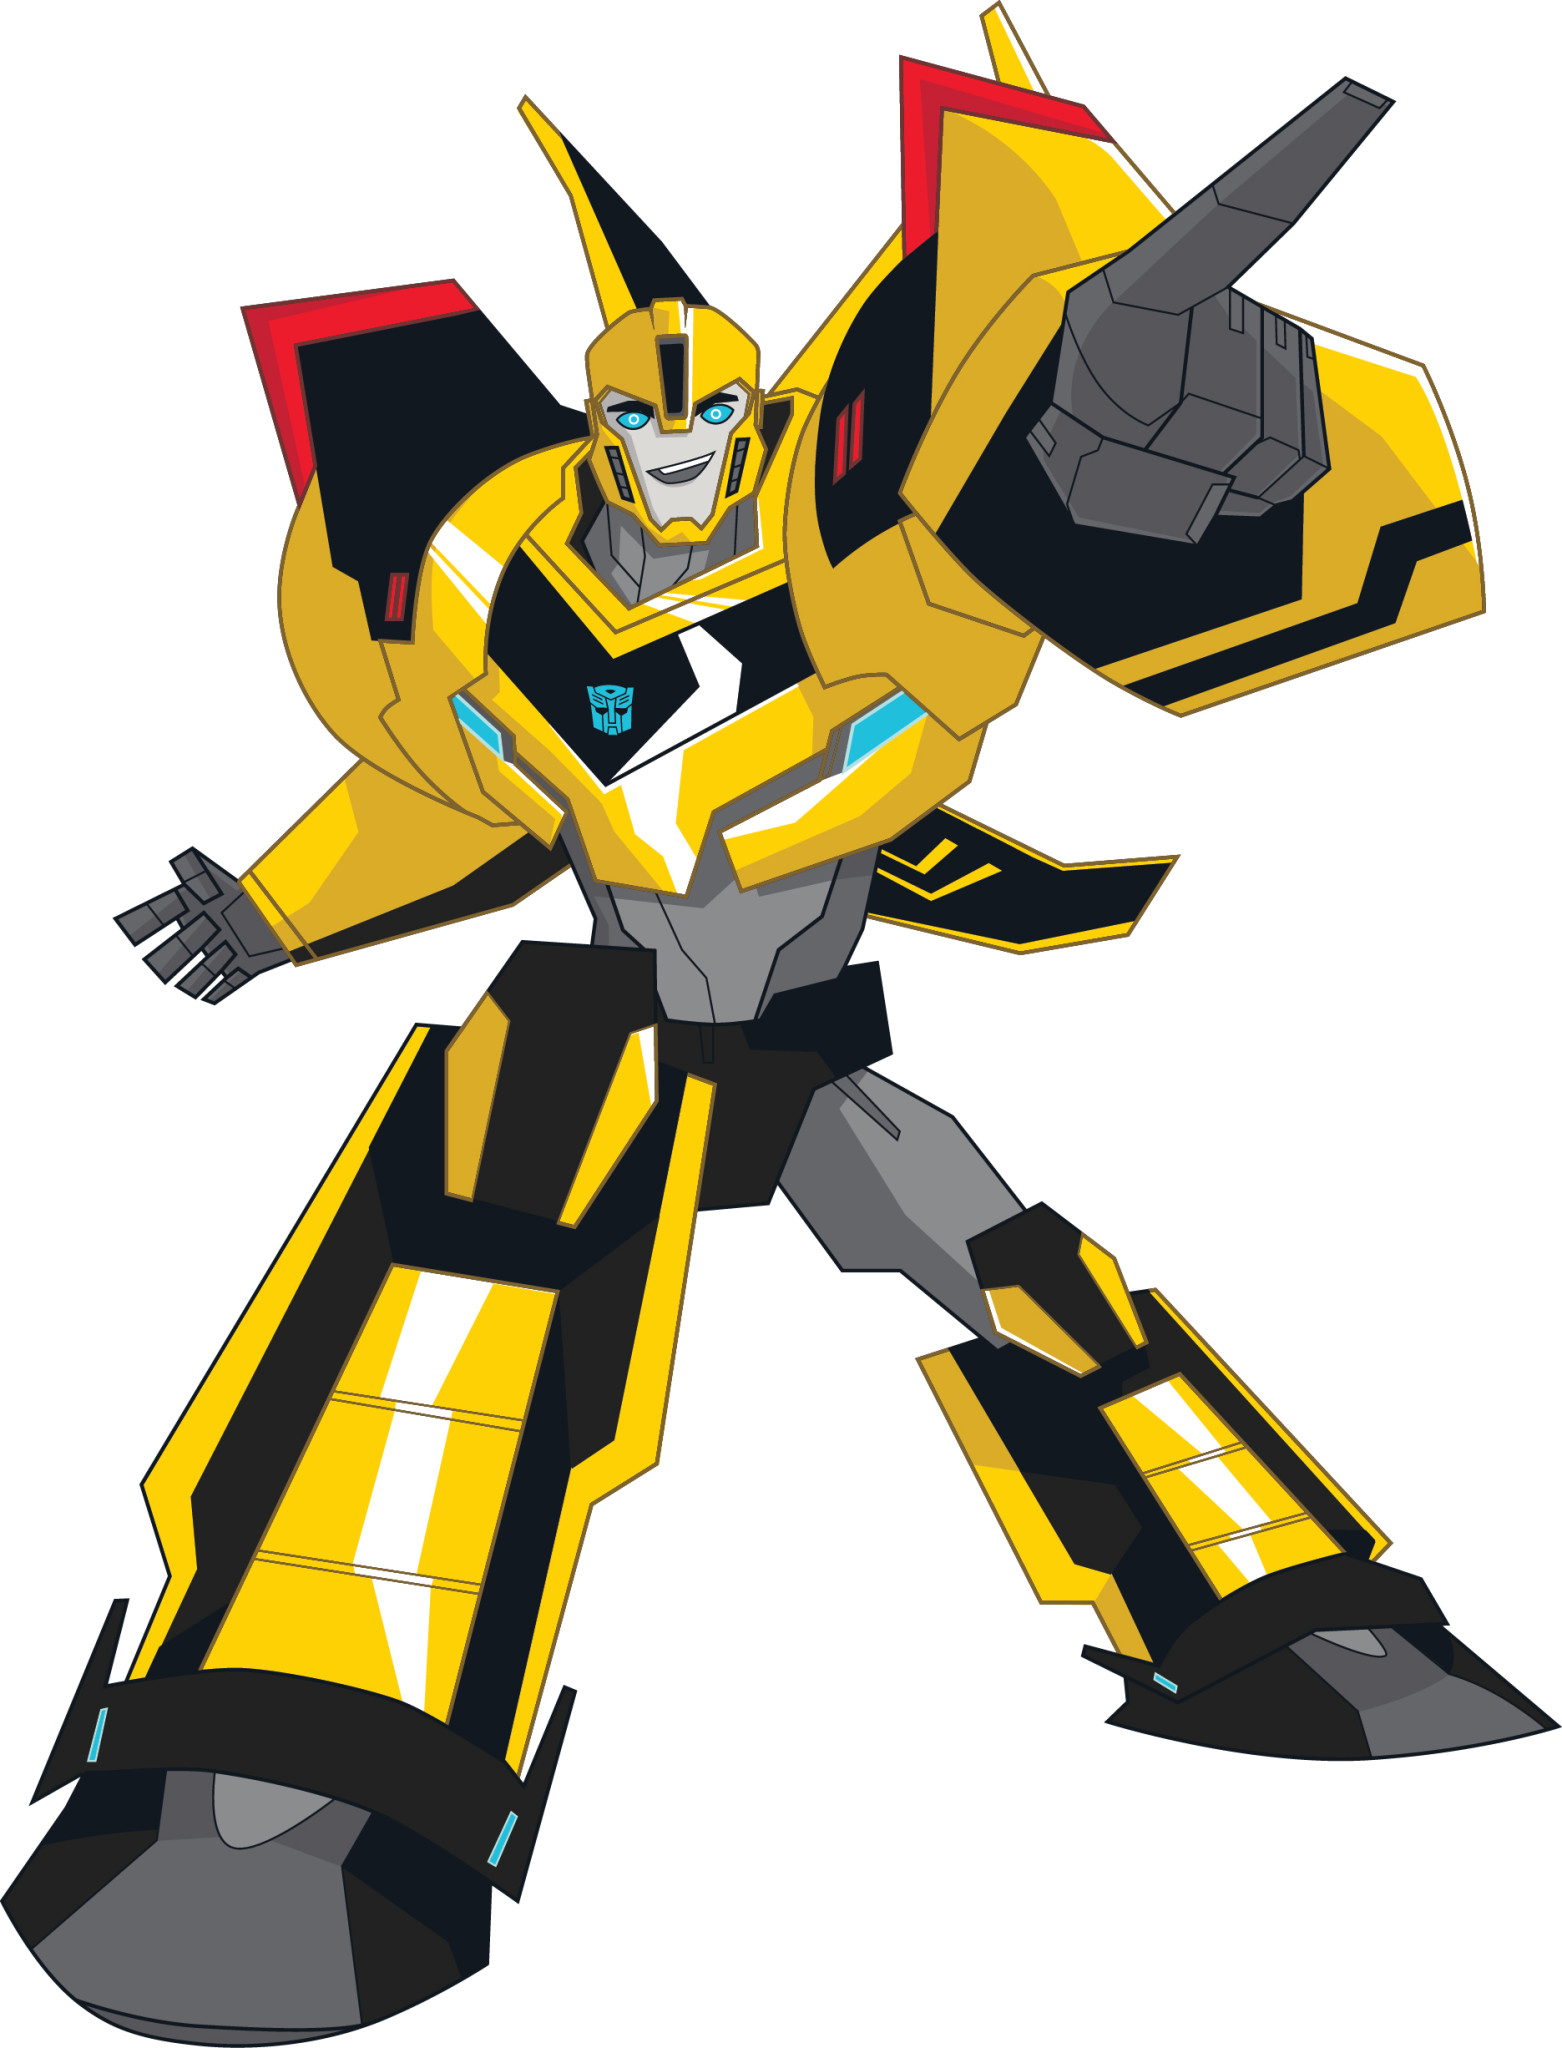 Brand New Transformers Series in Production for The Hub Network